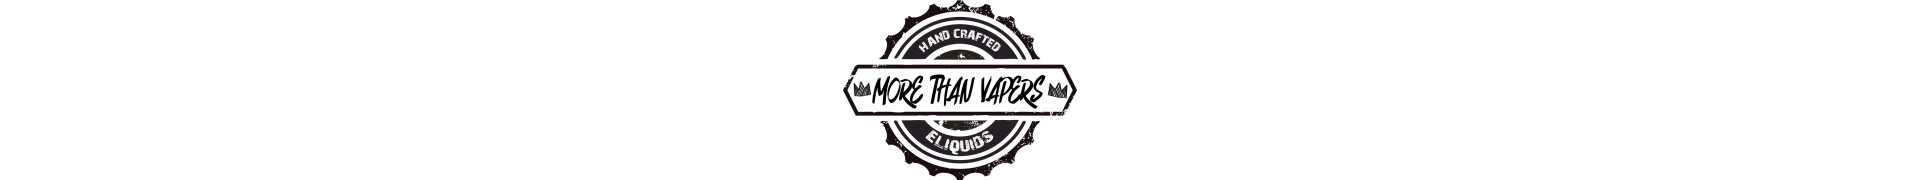 More Than Vapers 